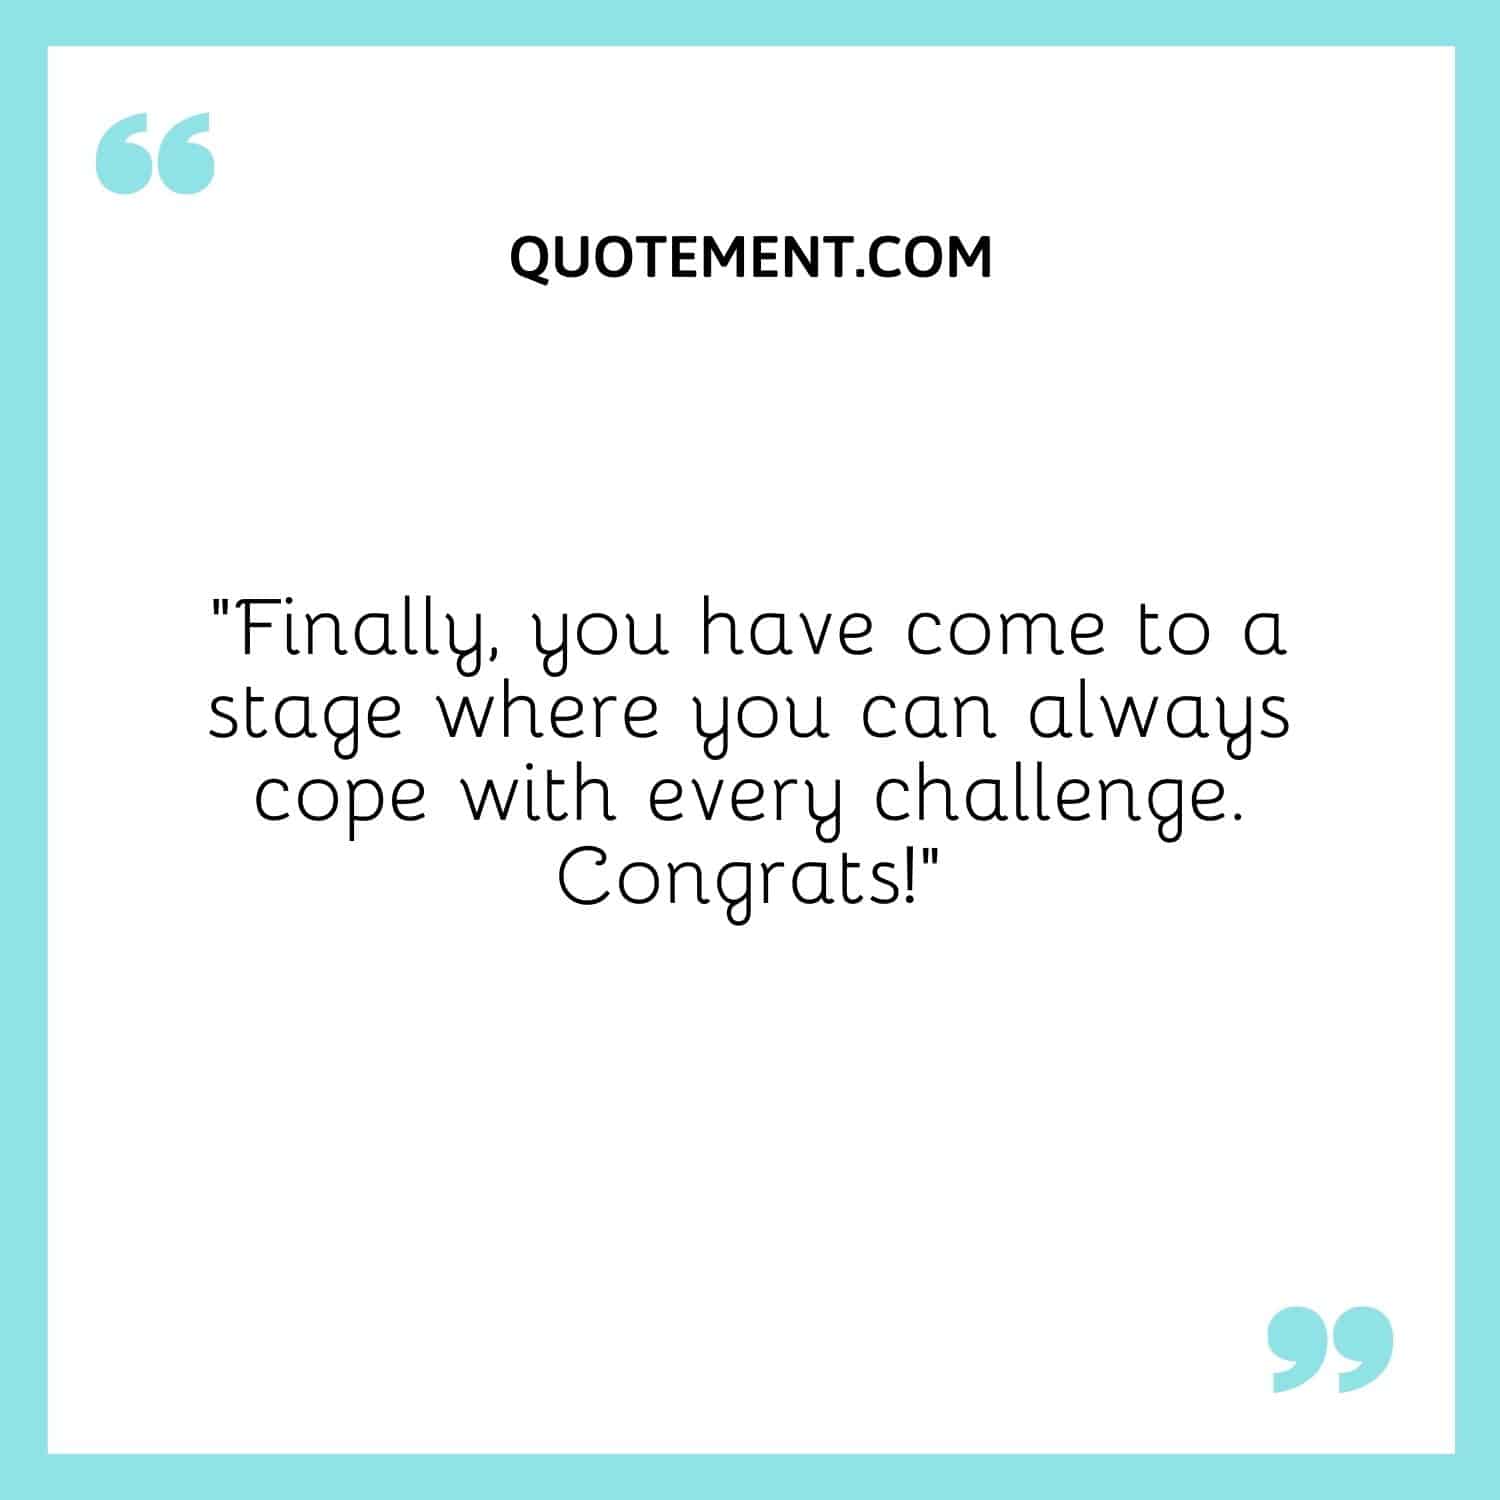 you have come to a stage where you can always cope with every challenge